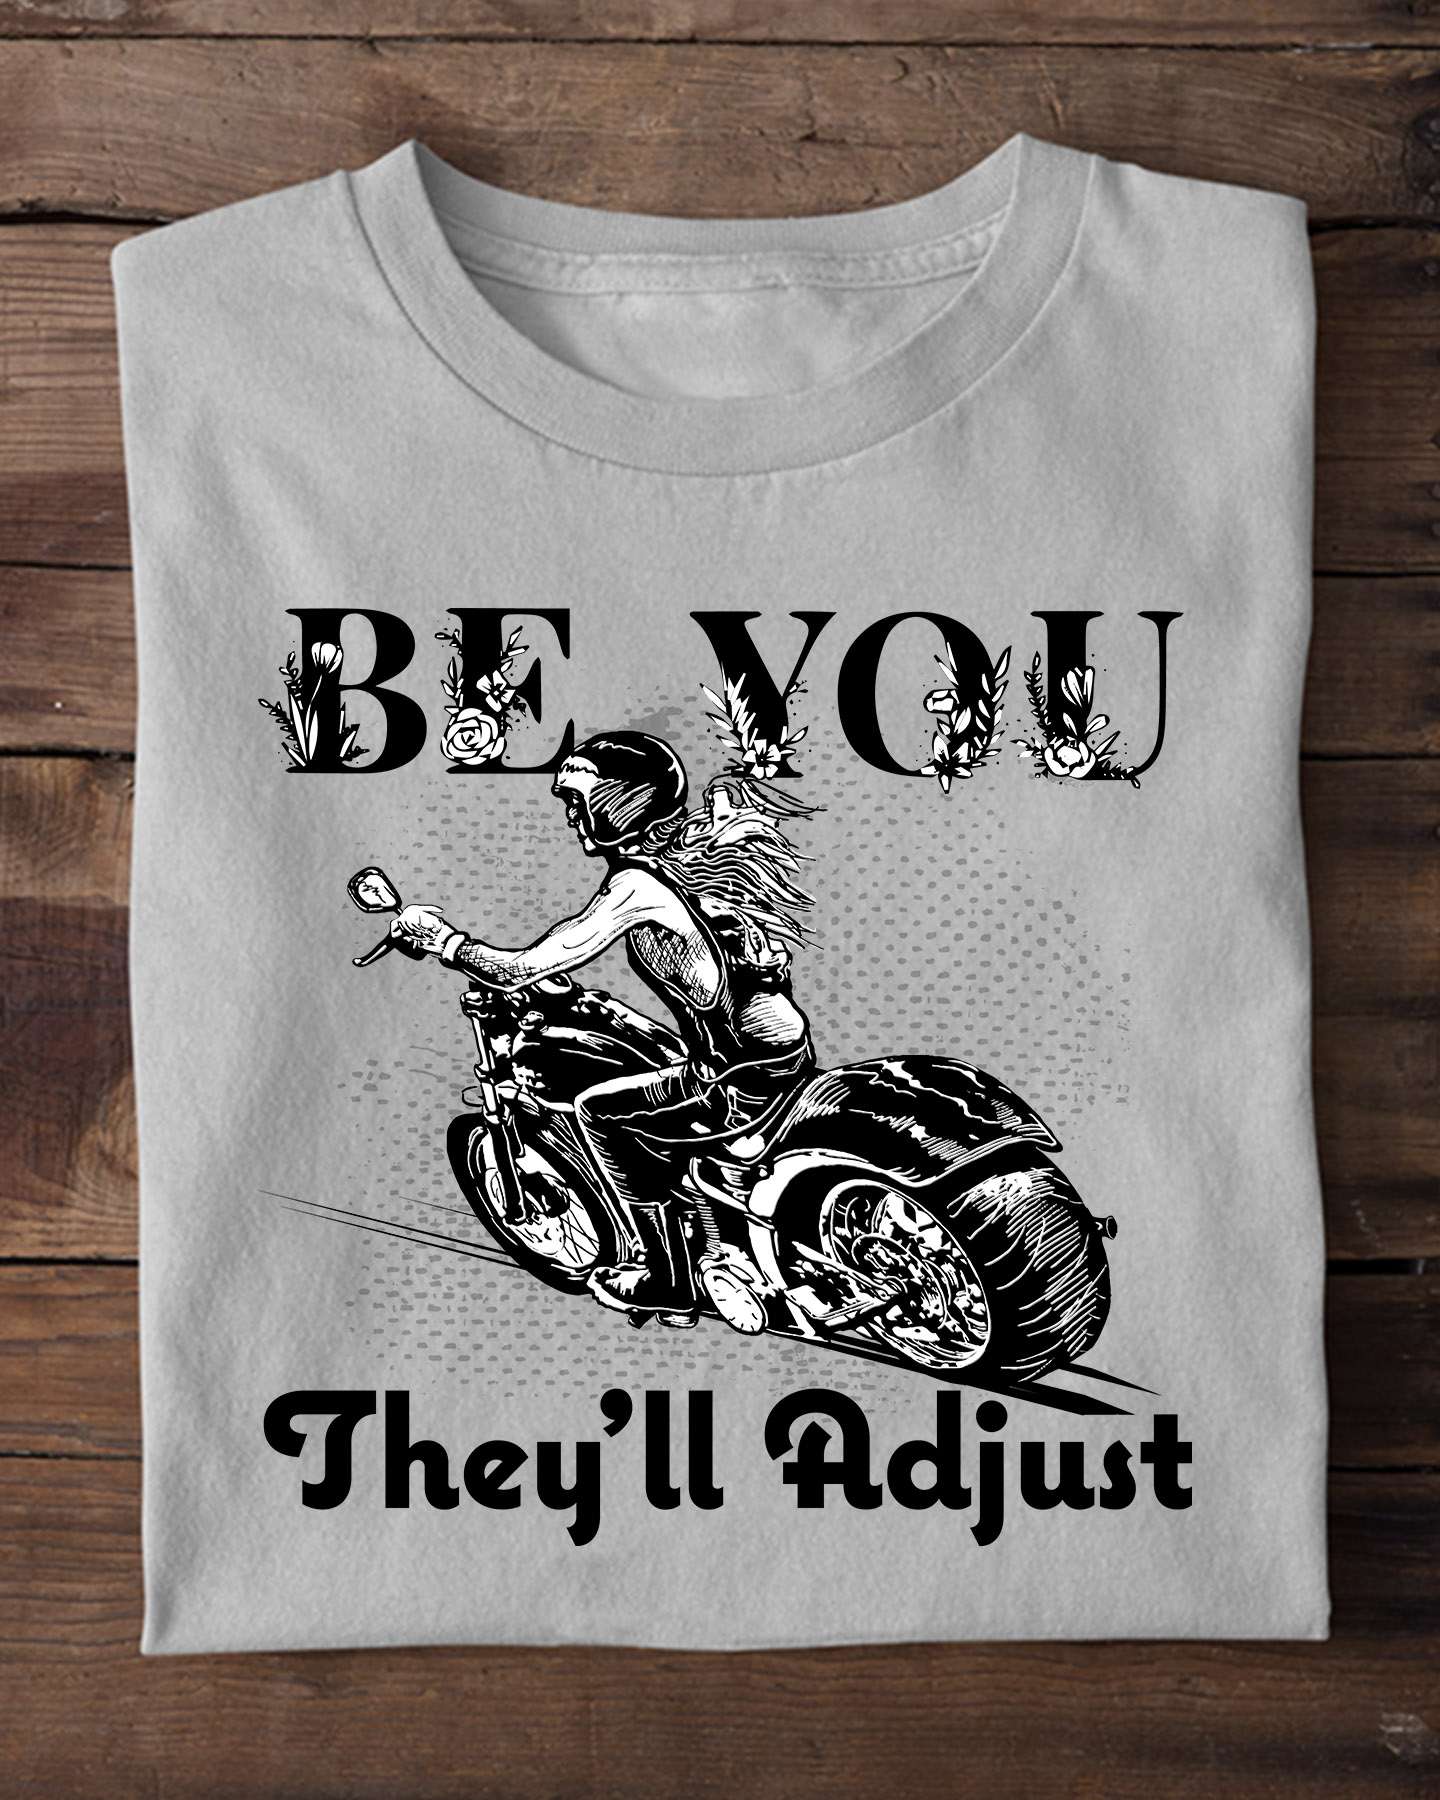 Be you they'll adjust - Be yourself, woman riding motorcycle